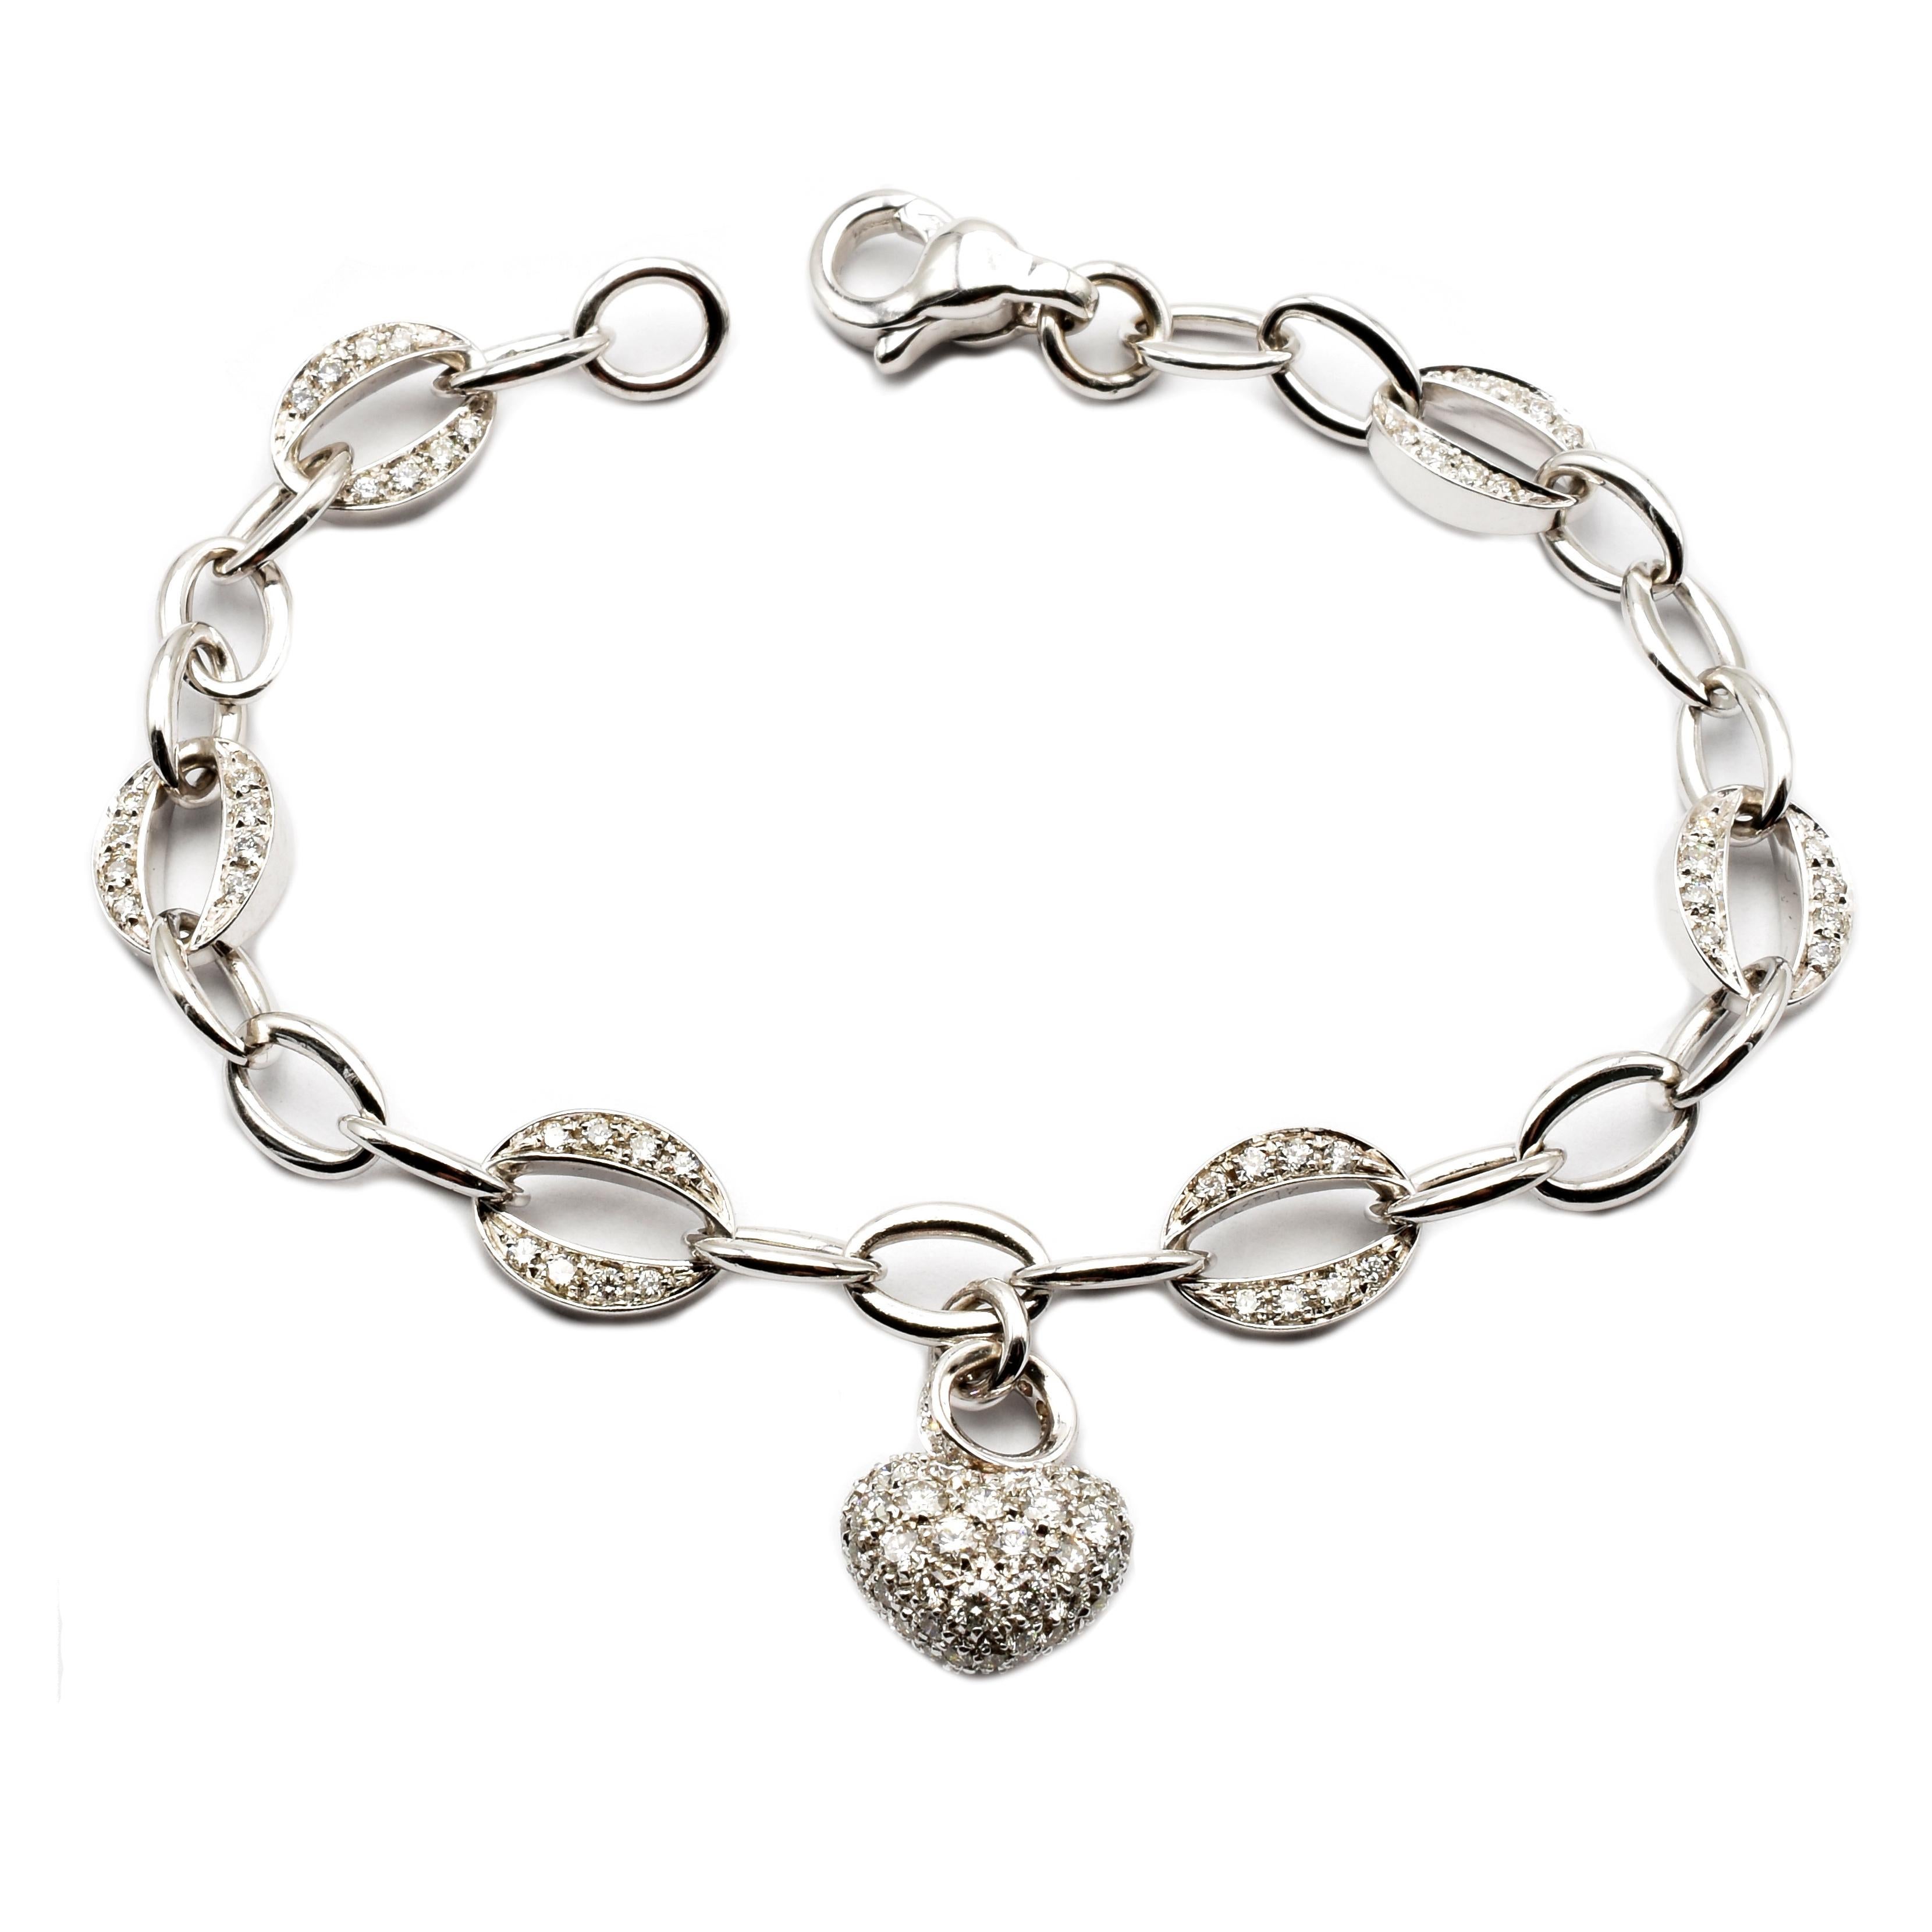 18 Kt White Gold Charm Bracelet with a Hanging Heart Completely set in White Diamonds. 
Handmade in Italy in our Atelier in Valenza (AL).
18Kt Gold g 15.50
White Diamonds (G Color Vs Clarity) ct 2.42
The Heart is fullly set with Diamonds. There is